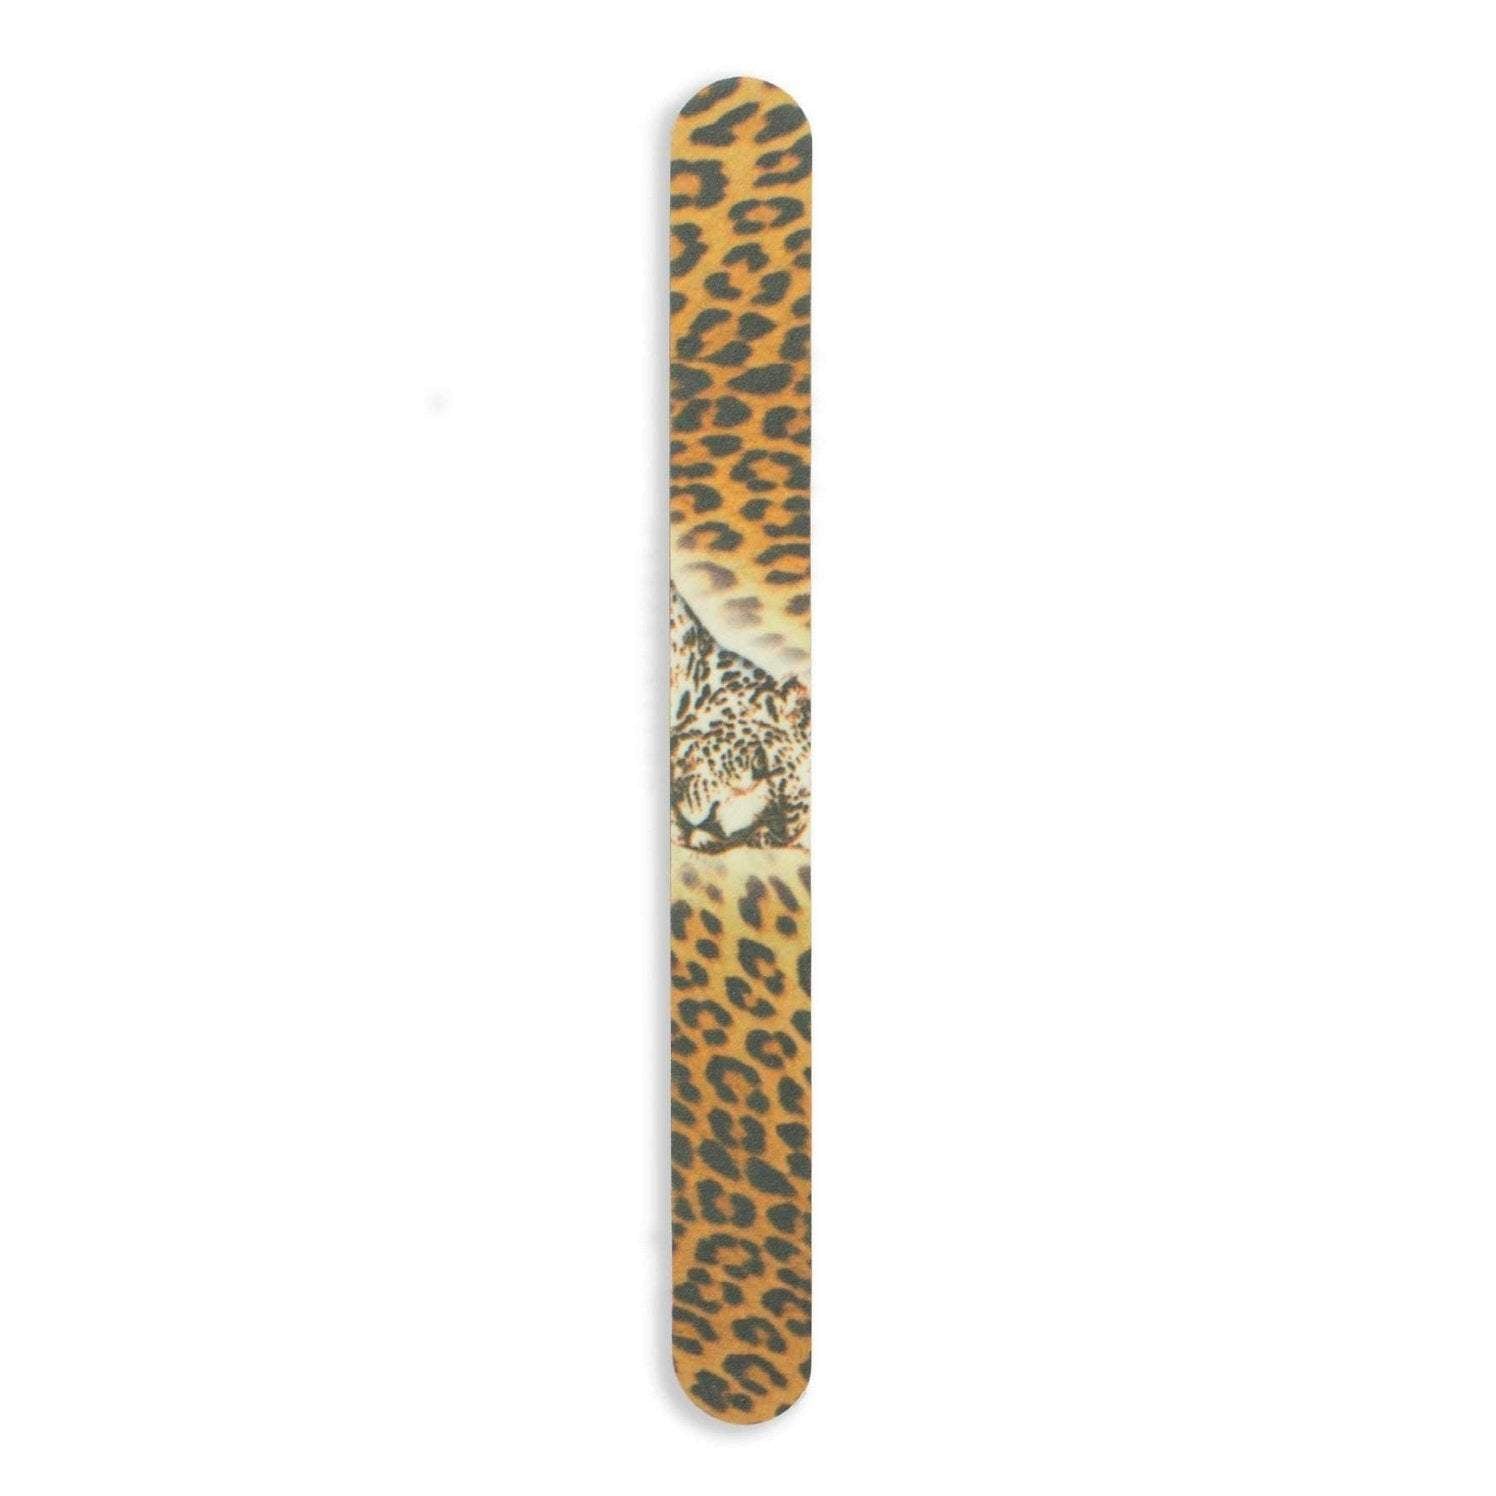 Tropical Shine Nail File Leopard 7 in x 3/4 in Large Size (707550)-Tropical Shine-Brand_Tropical Shine,Collection_Nails,Collection_Summer,Nail_Tools,Tool_Nails